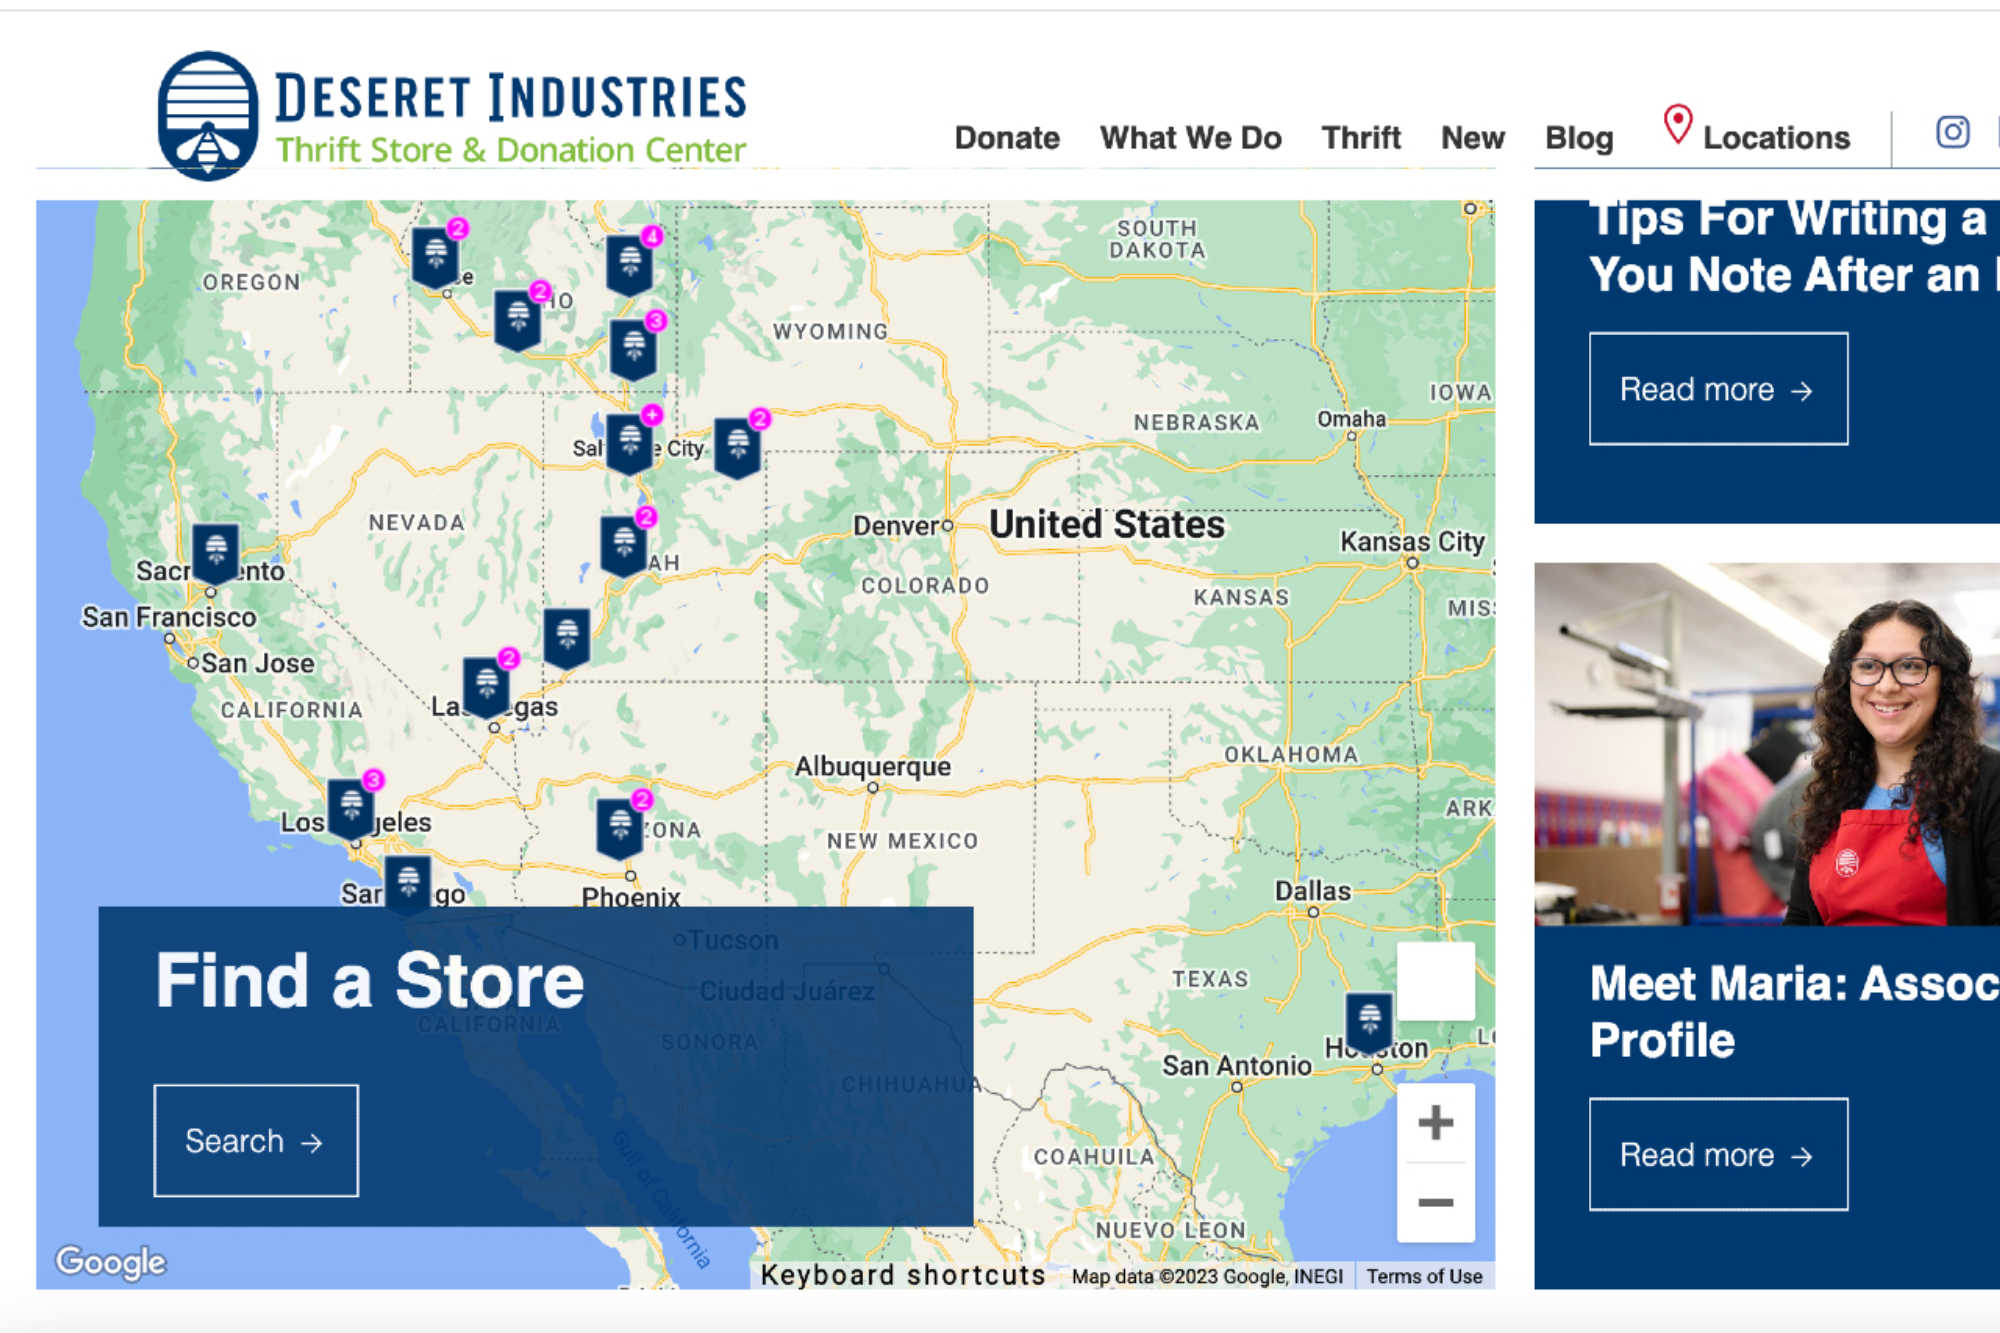 A screenshot of the Deseret Industries home page, where you can click "Find a Store" to check donation hours near you.